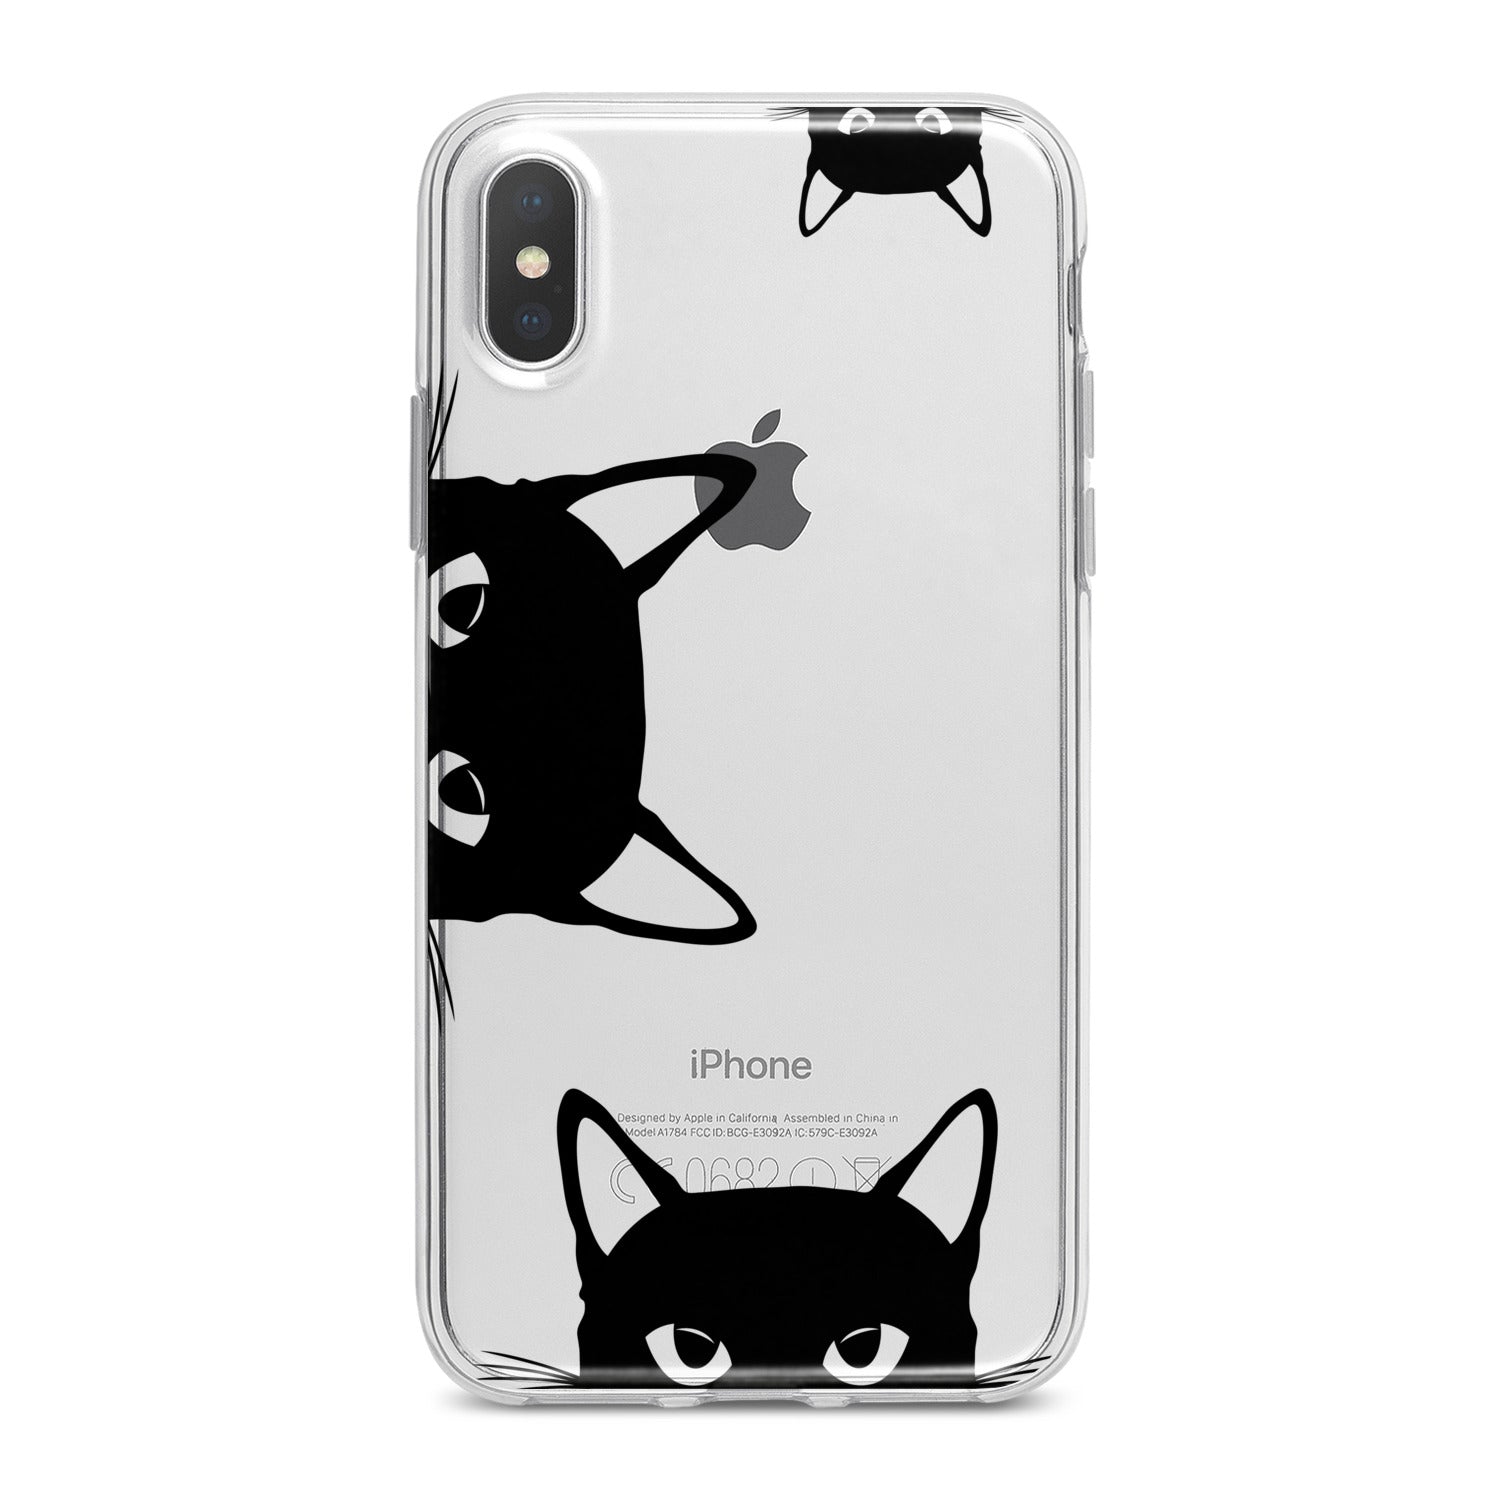 Lex Altern Elegant Black Cats Phone Case for your iPhone & Android phone.